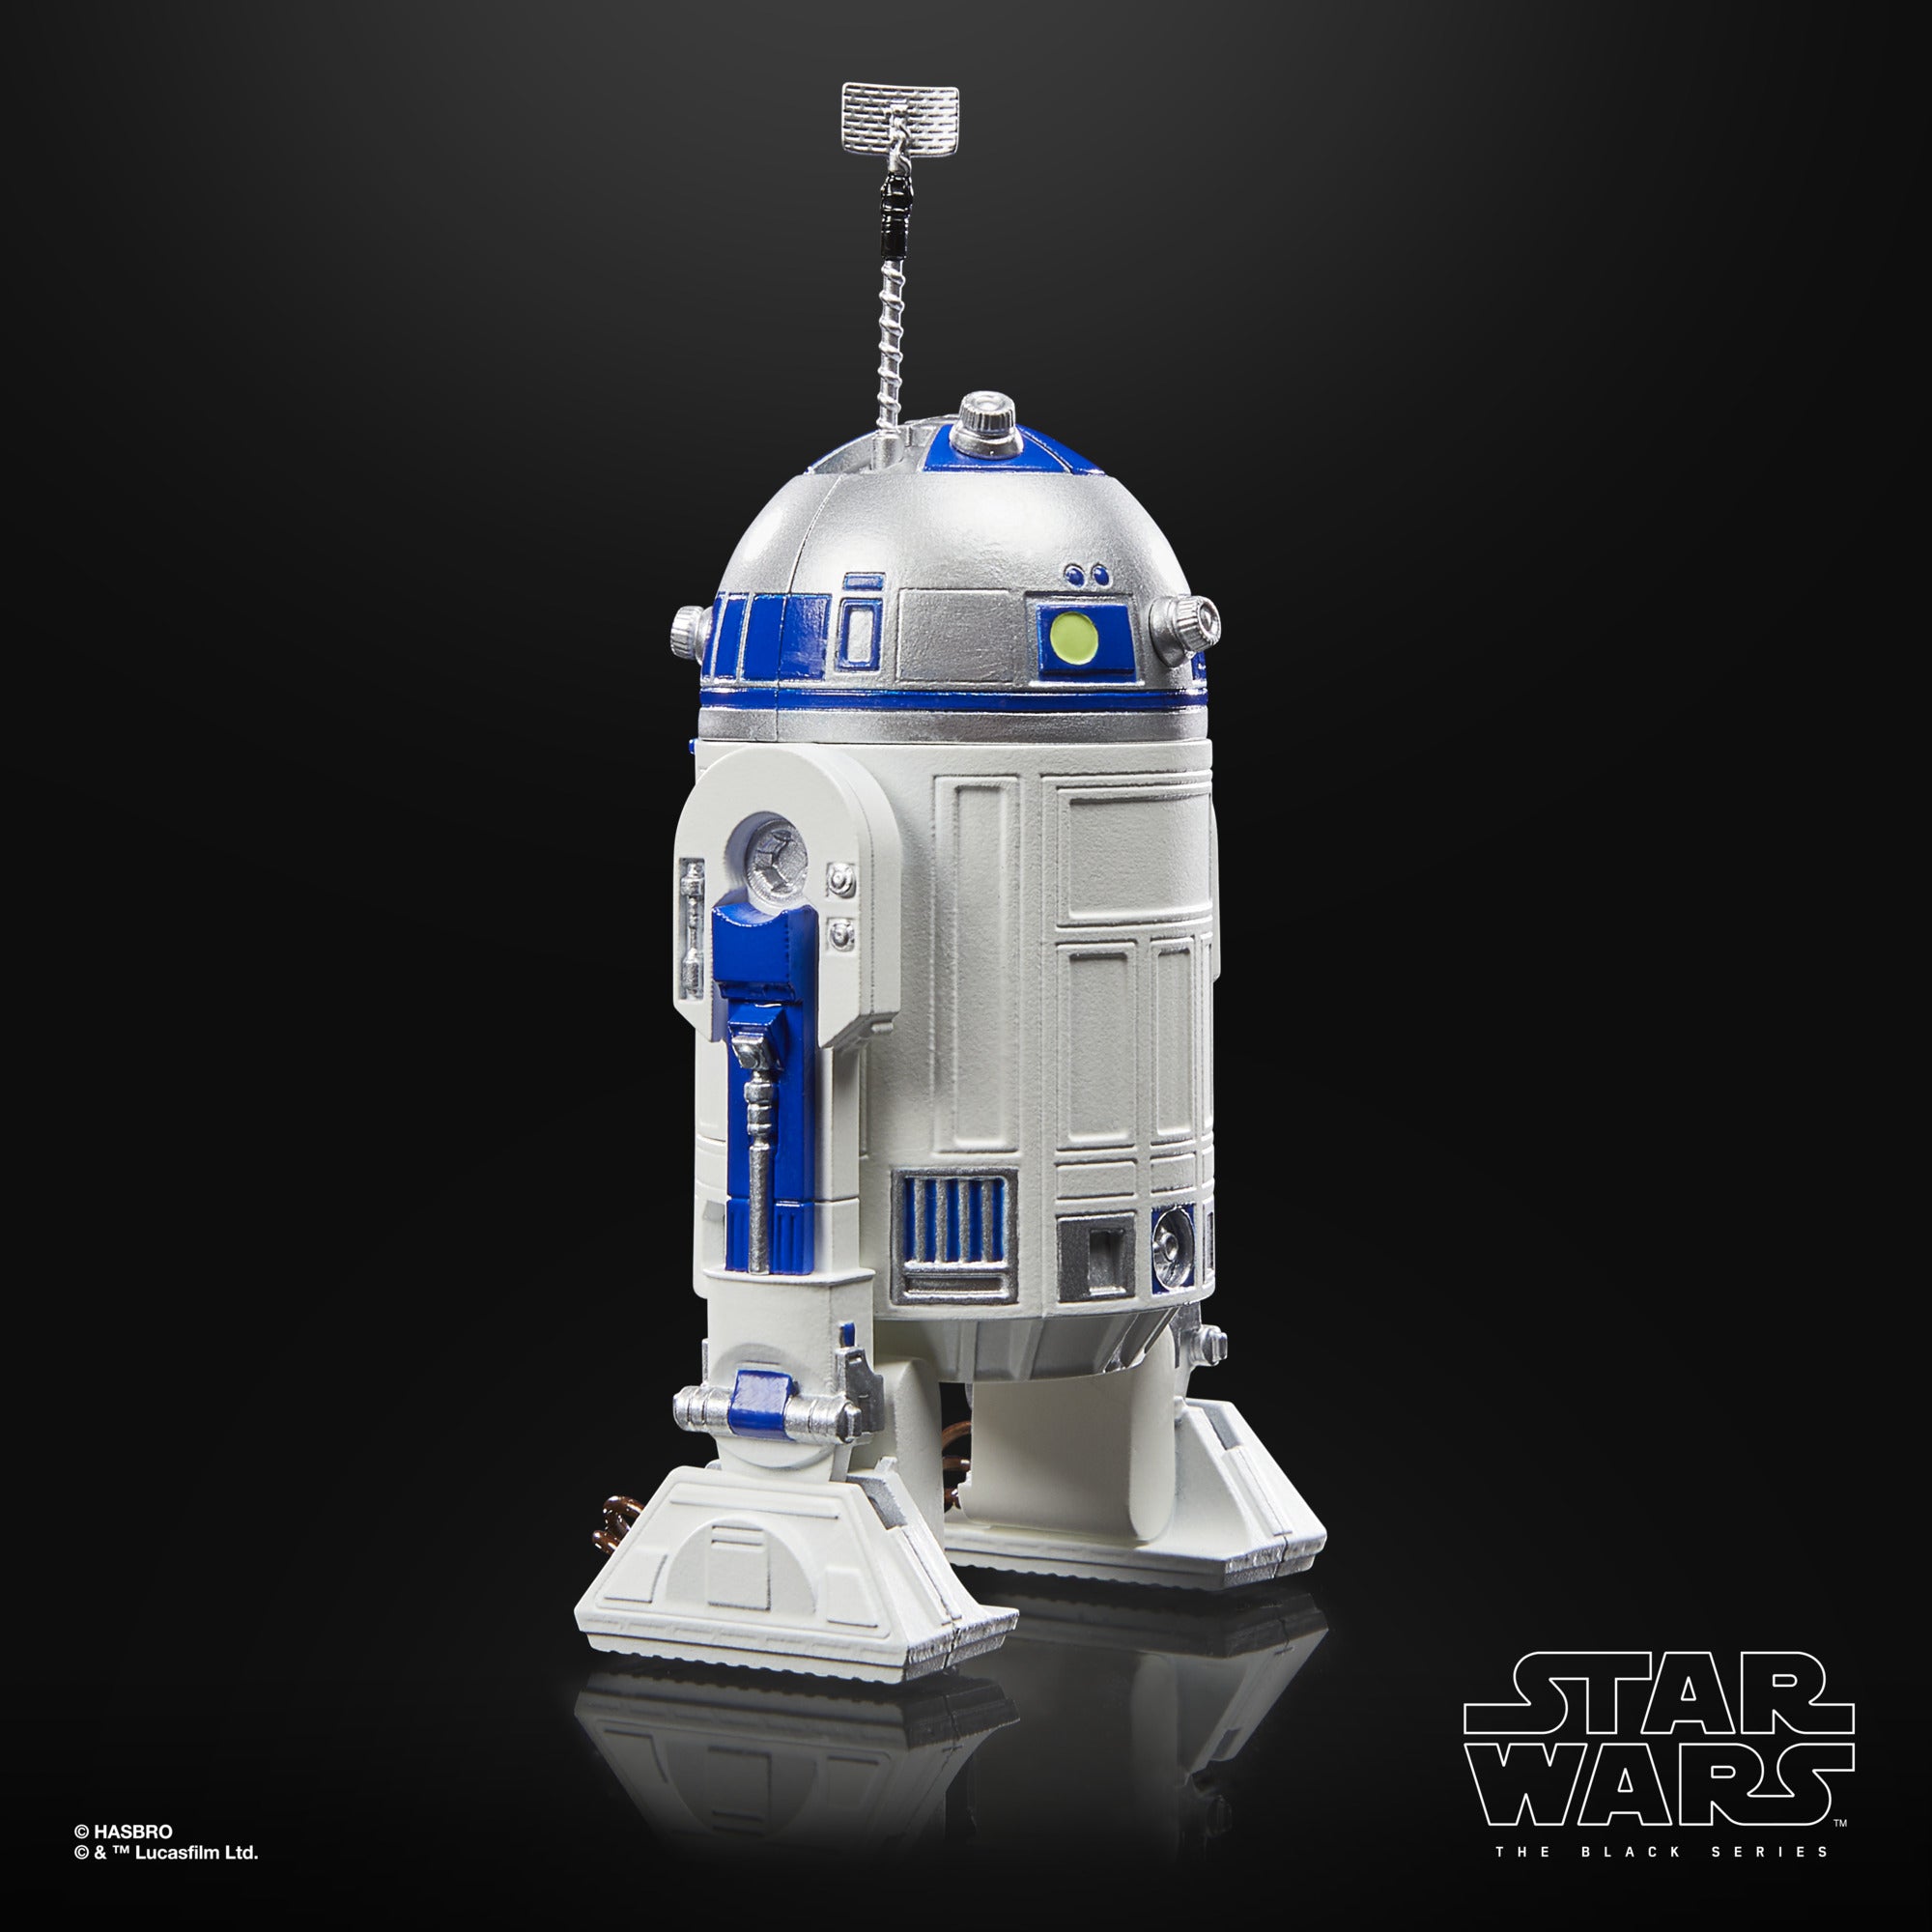 Zoff STAR WARS COLLECTION R2-D2 ModelZoff